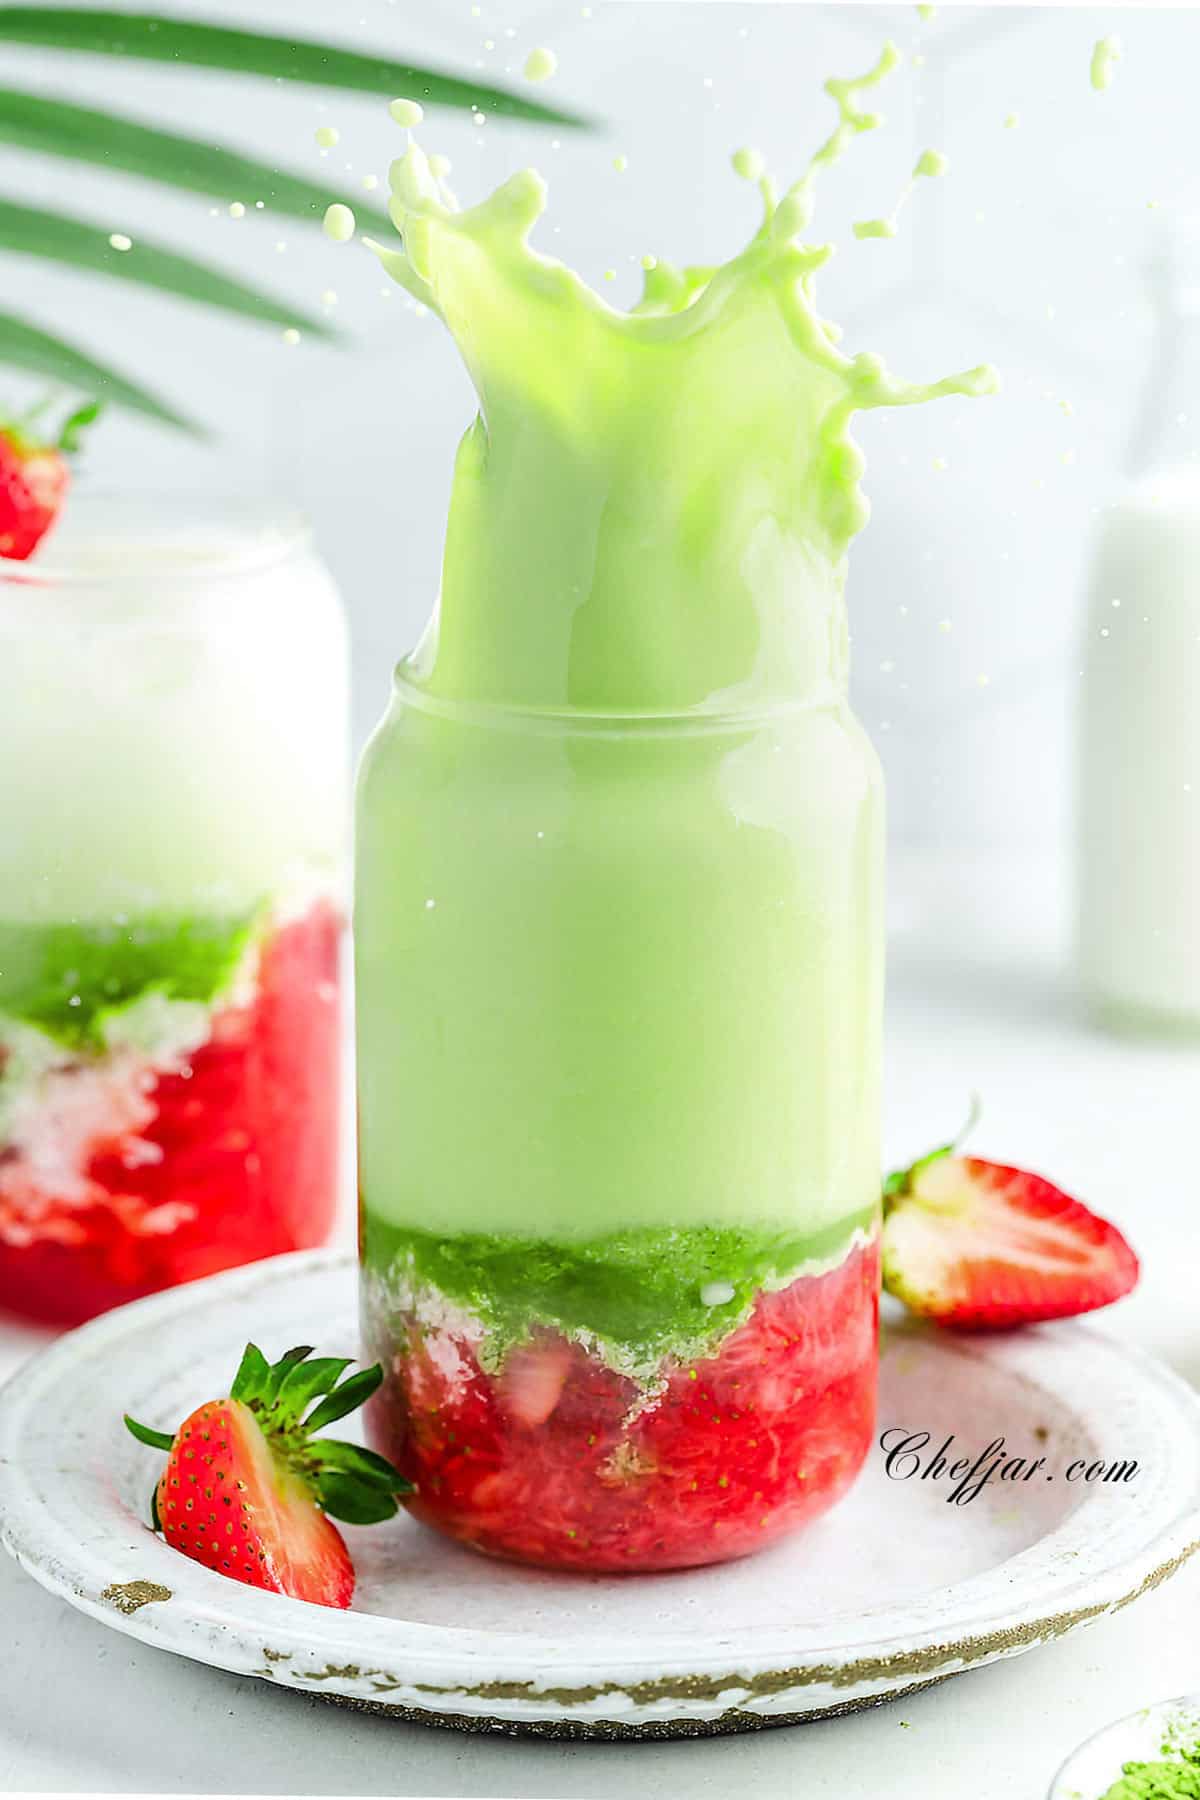 Strawberry matcha latte with green, white, and red layers.